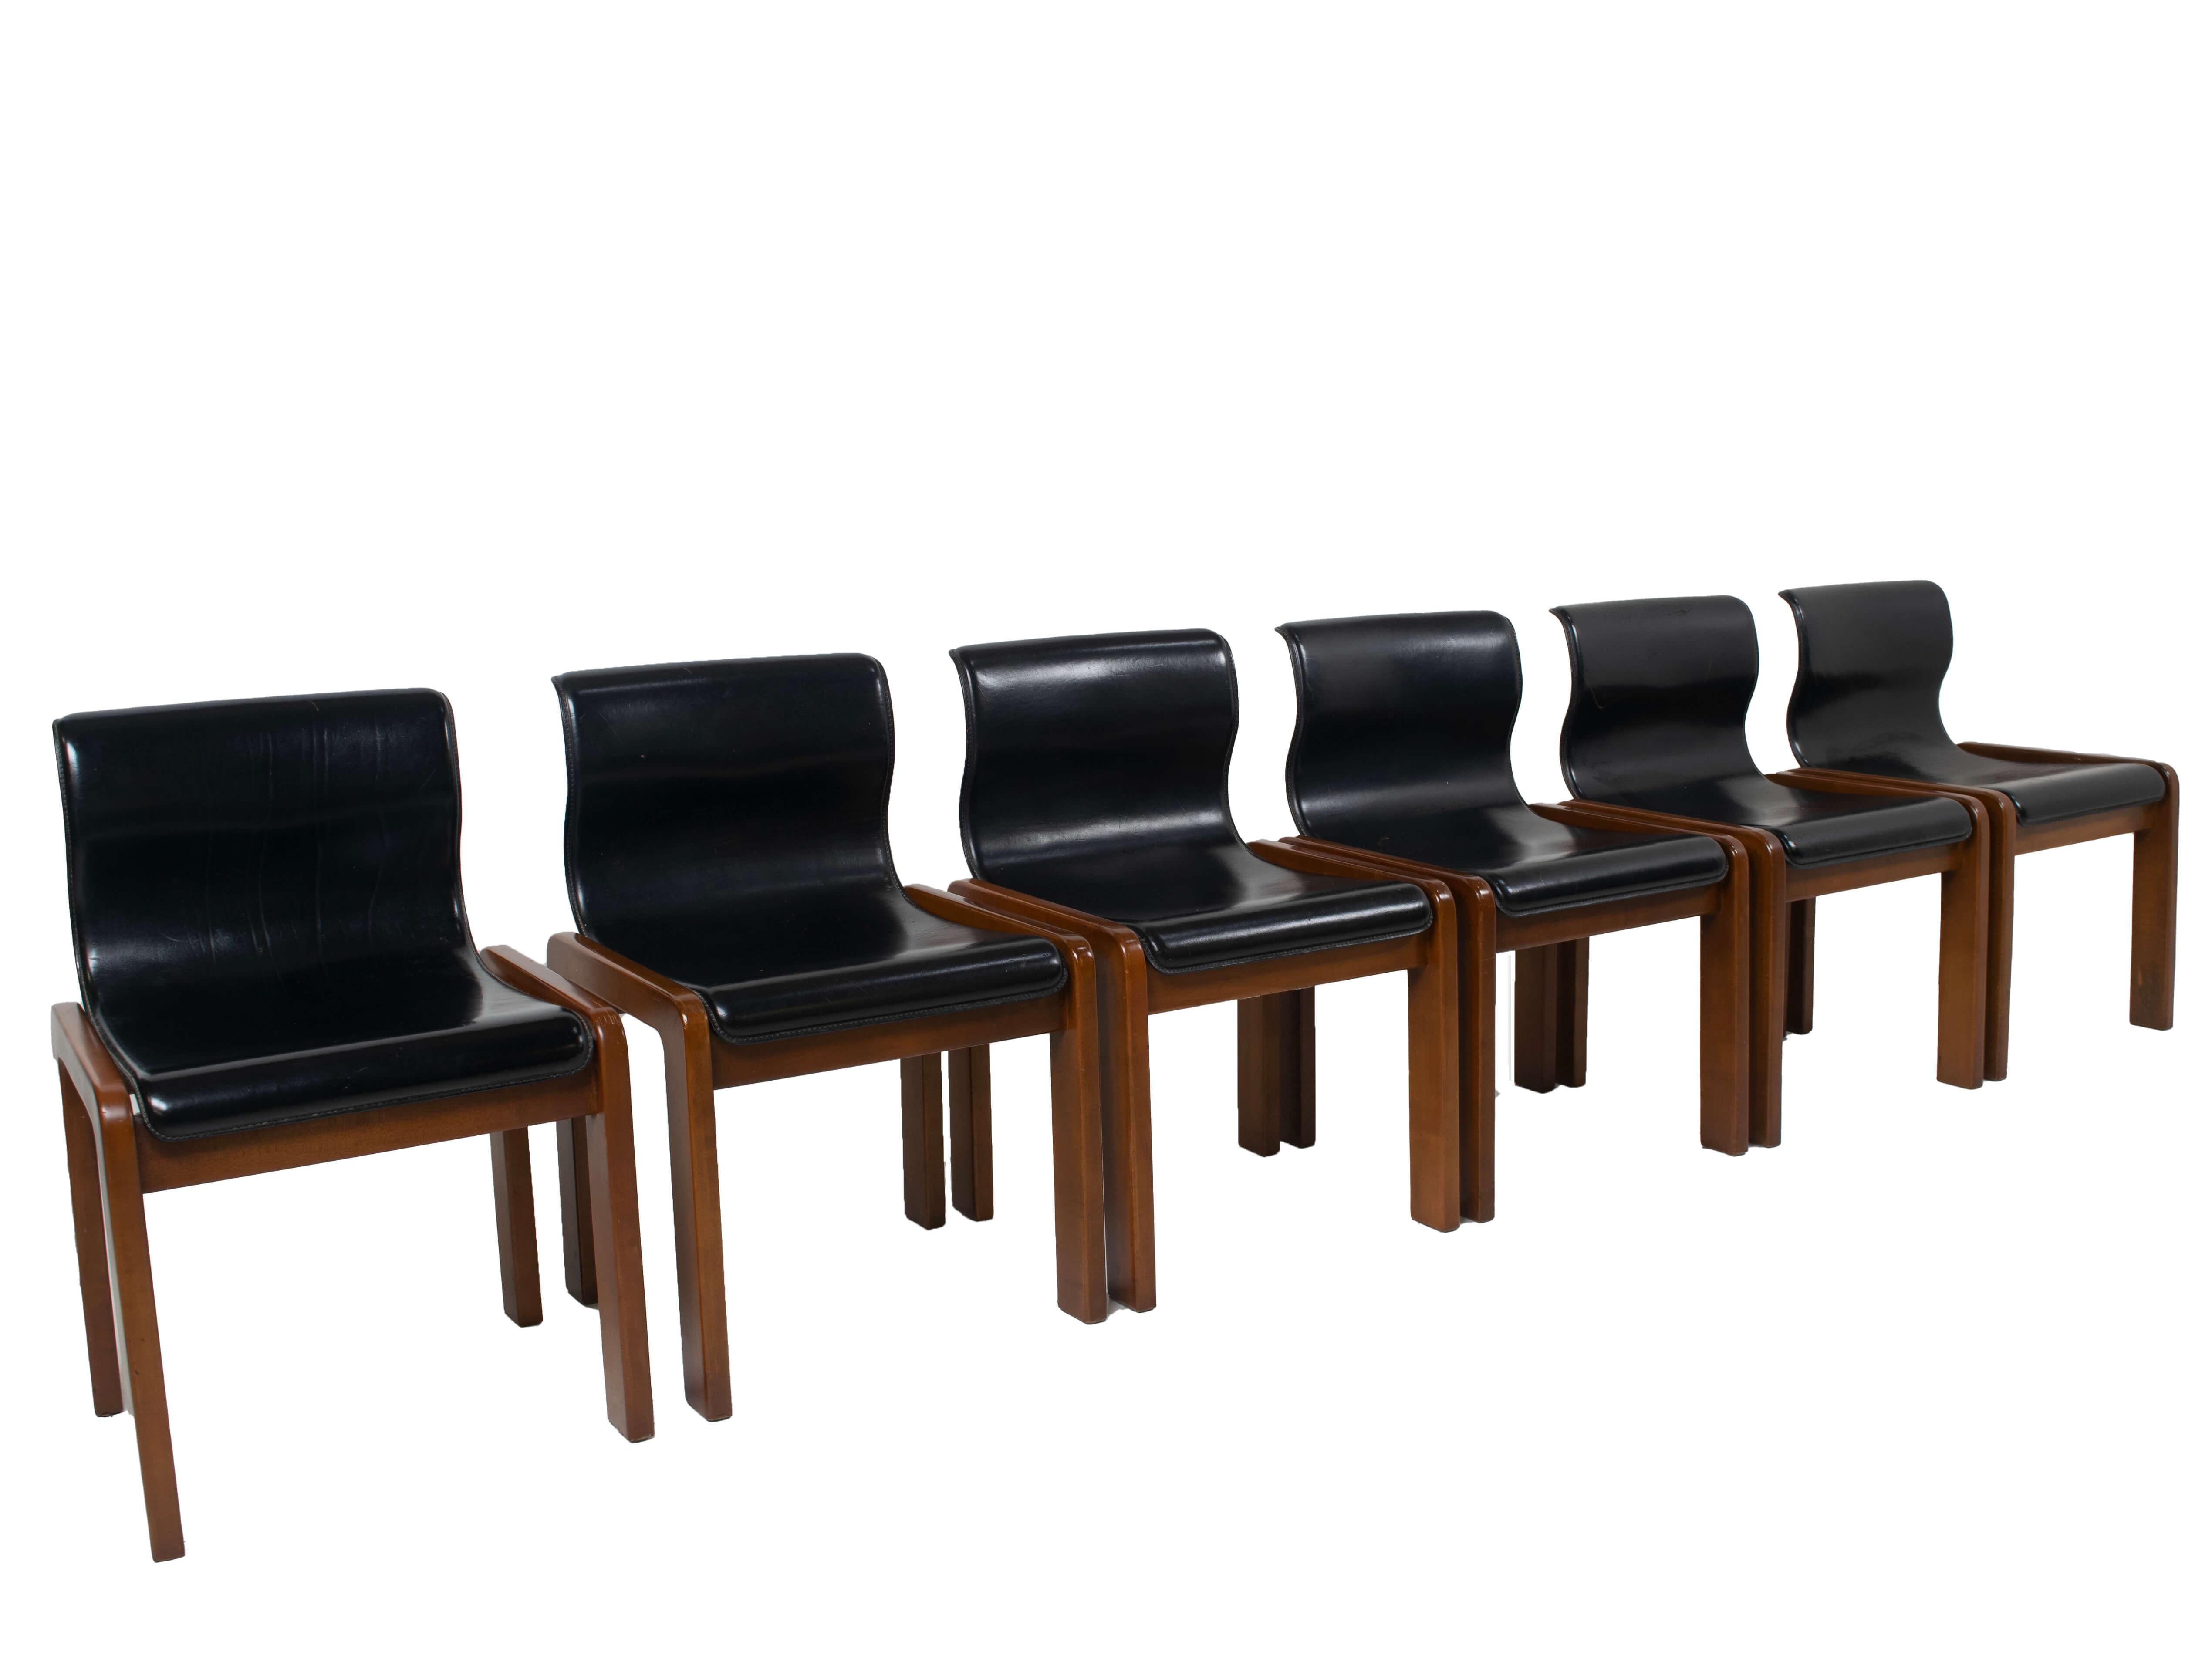 Set of Six Afra & Tobia Scarpa midcentury leather and plywood dining chairs, Italy 1966. These chairs can be attributed to Afra & Tobia Scarpa as they are identical to the chairs they designed for a Villa in Francavilla Fontana, in the late '60s.